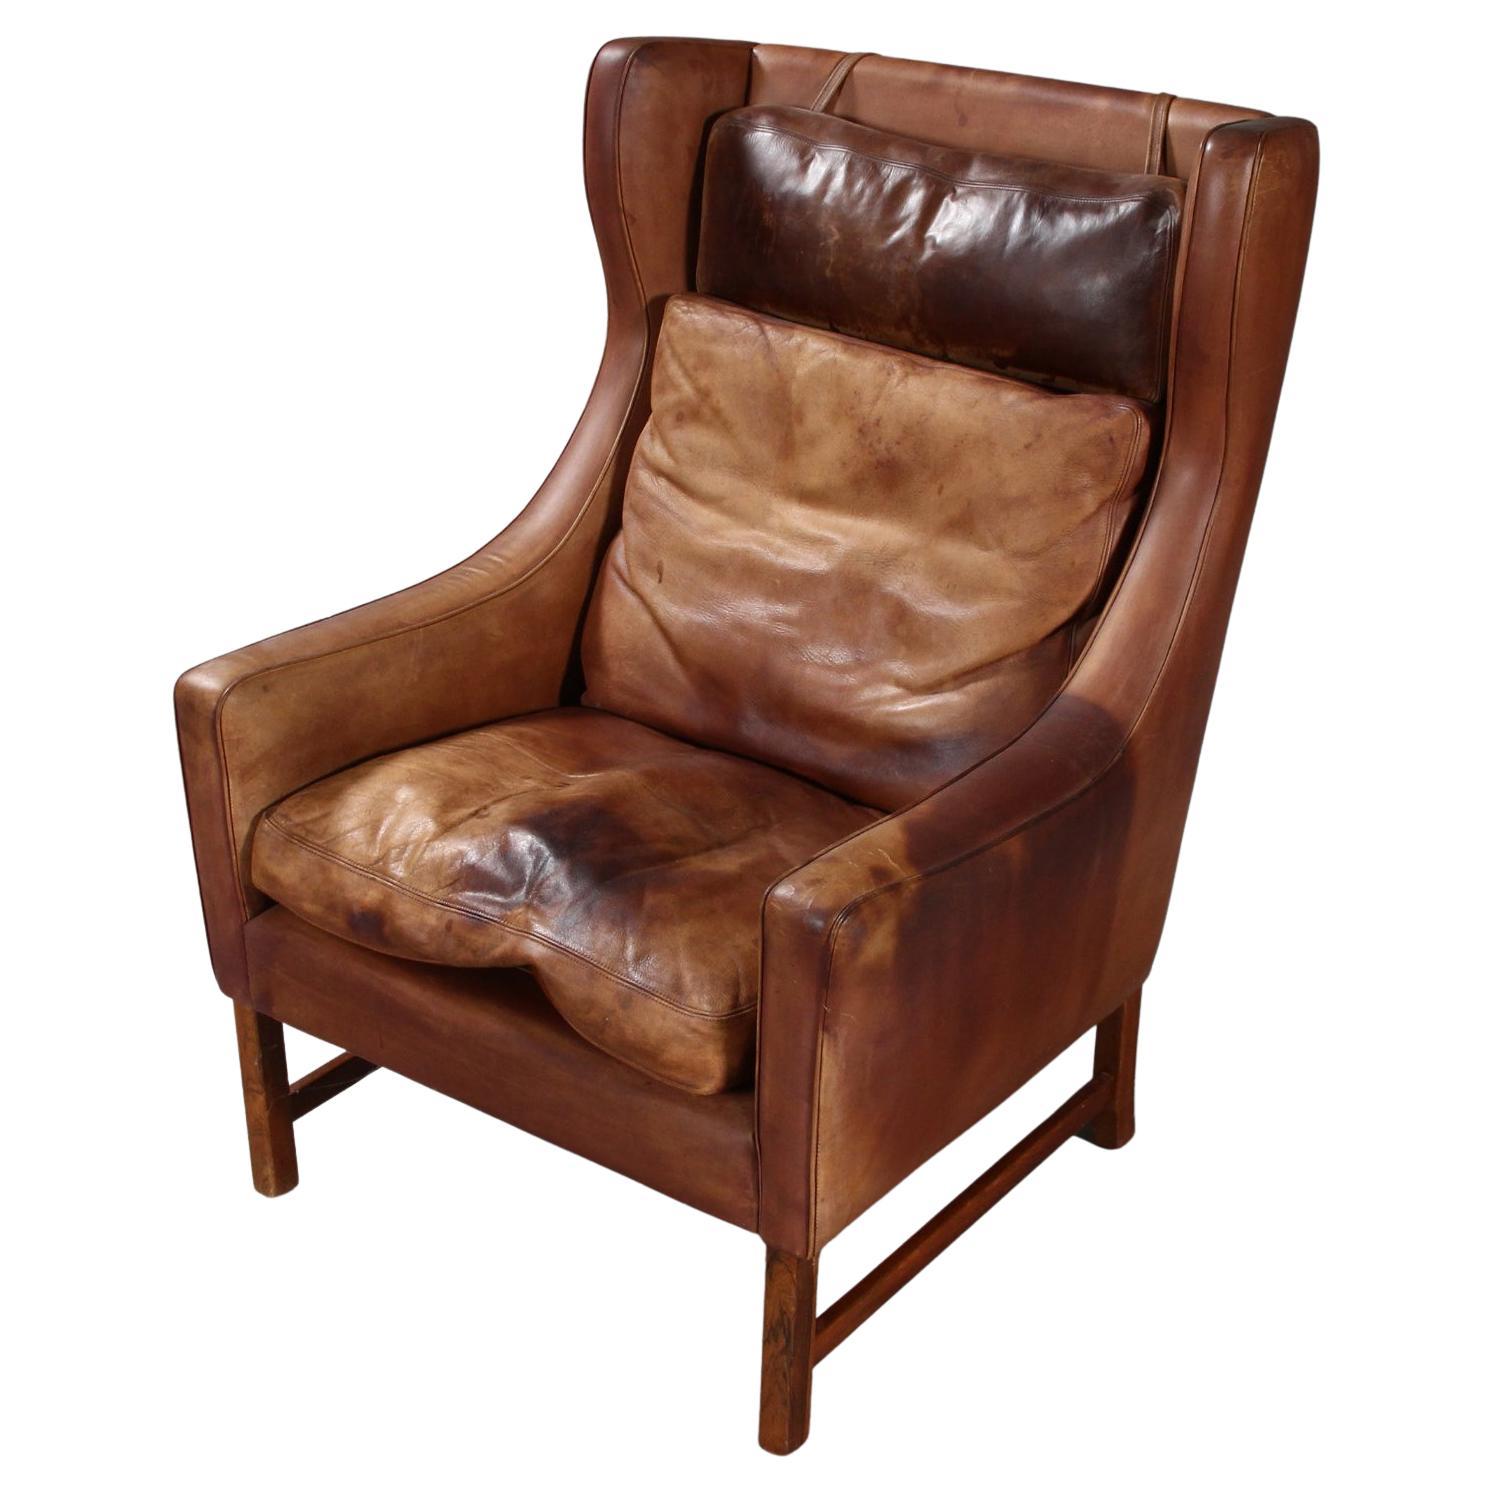 Frederik A. Kayser Wingback Chair Upholstered in Cognac-Ccolored Leather